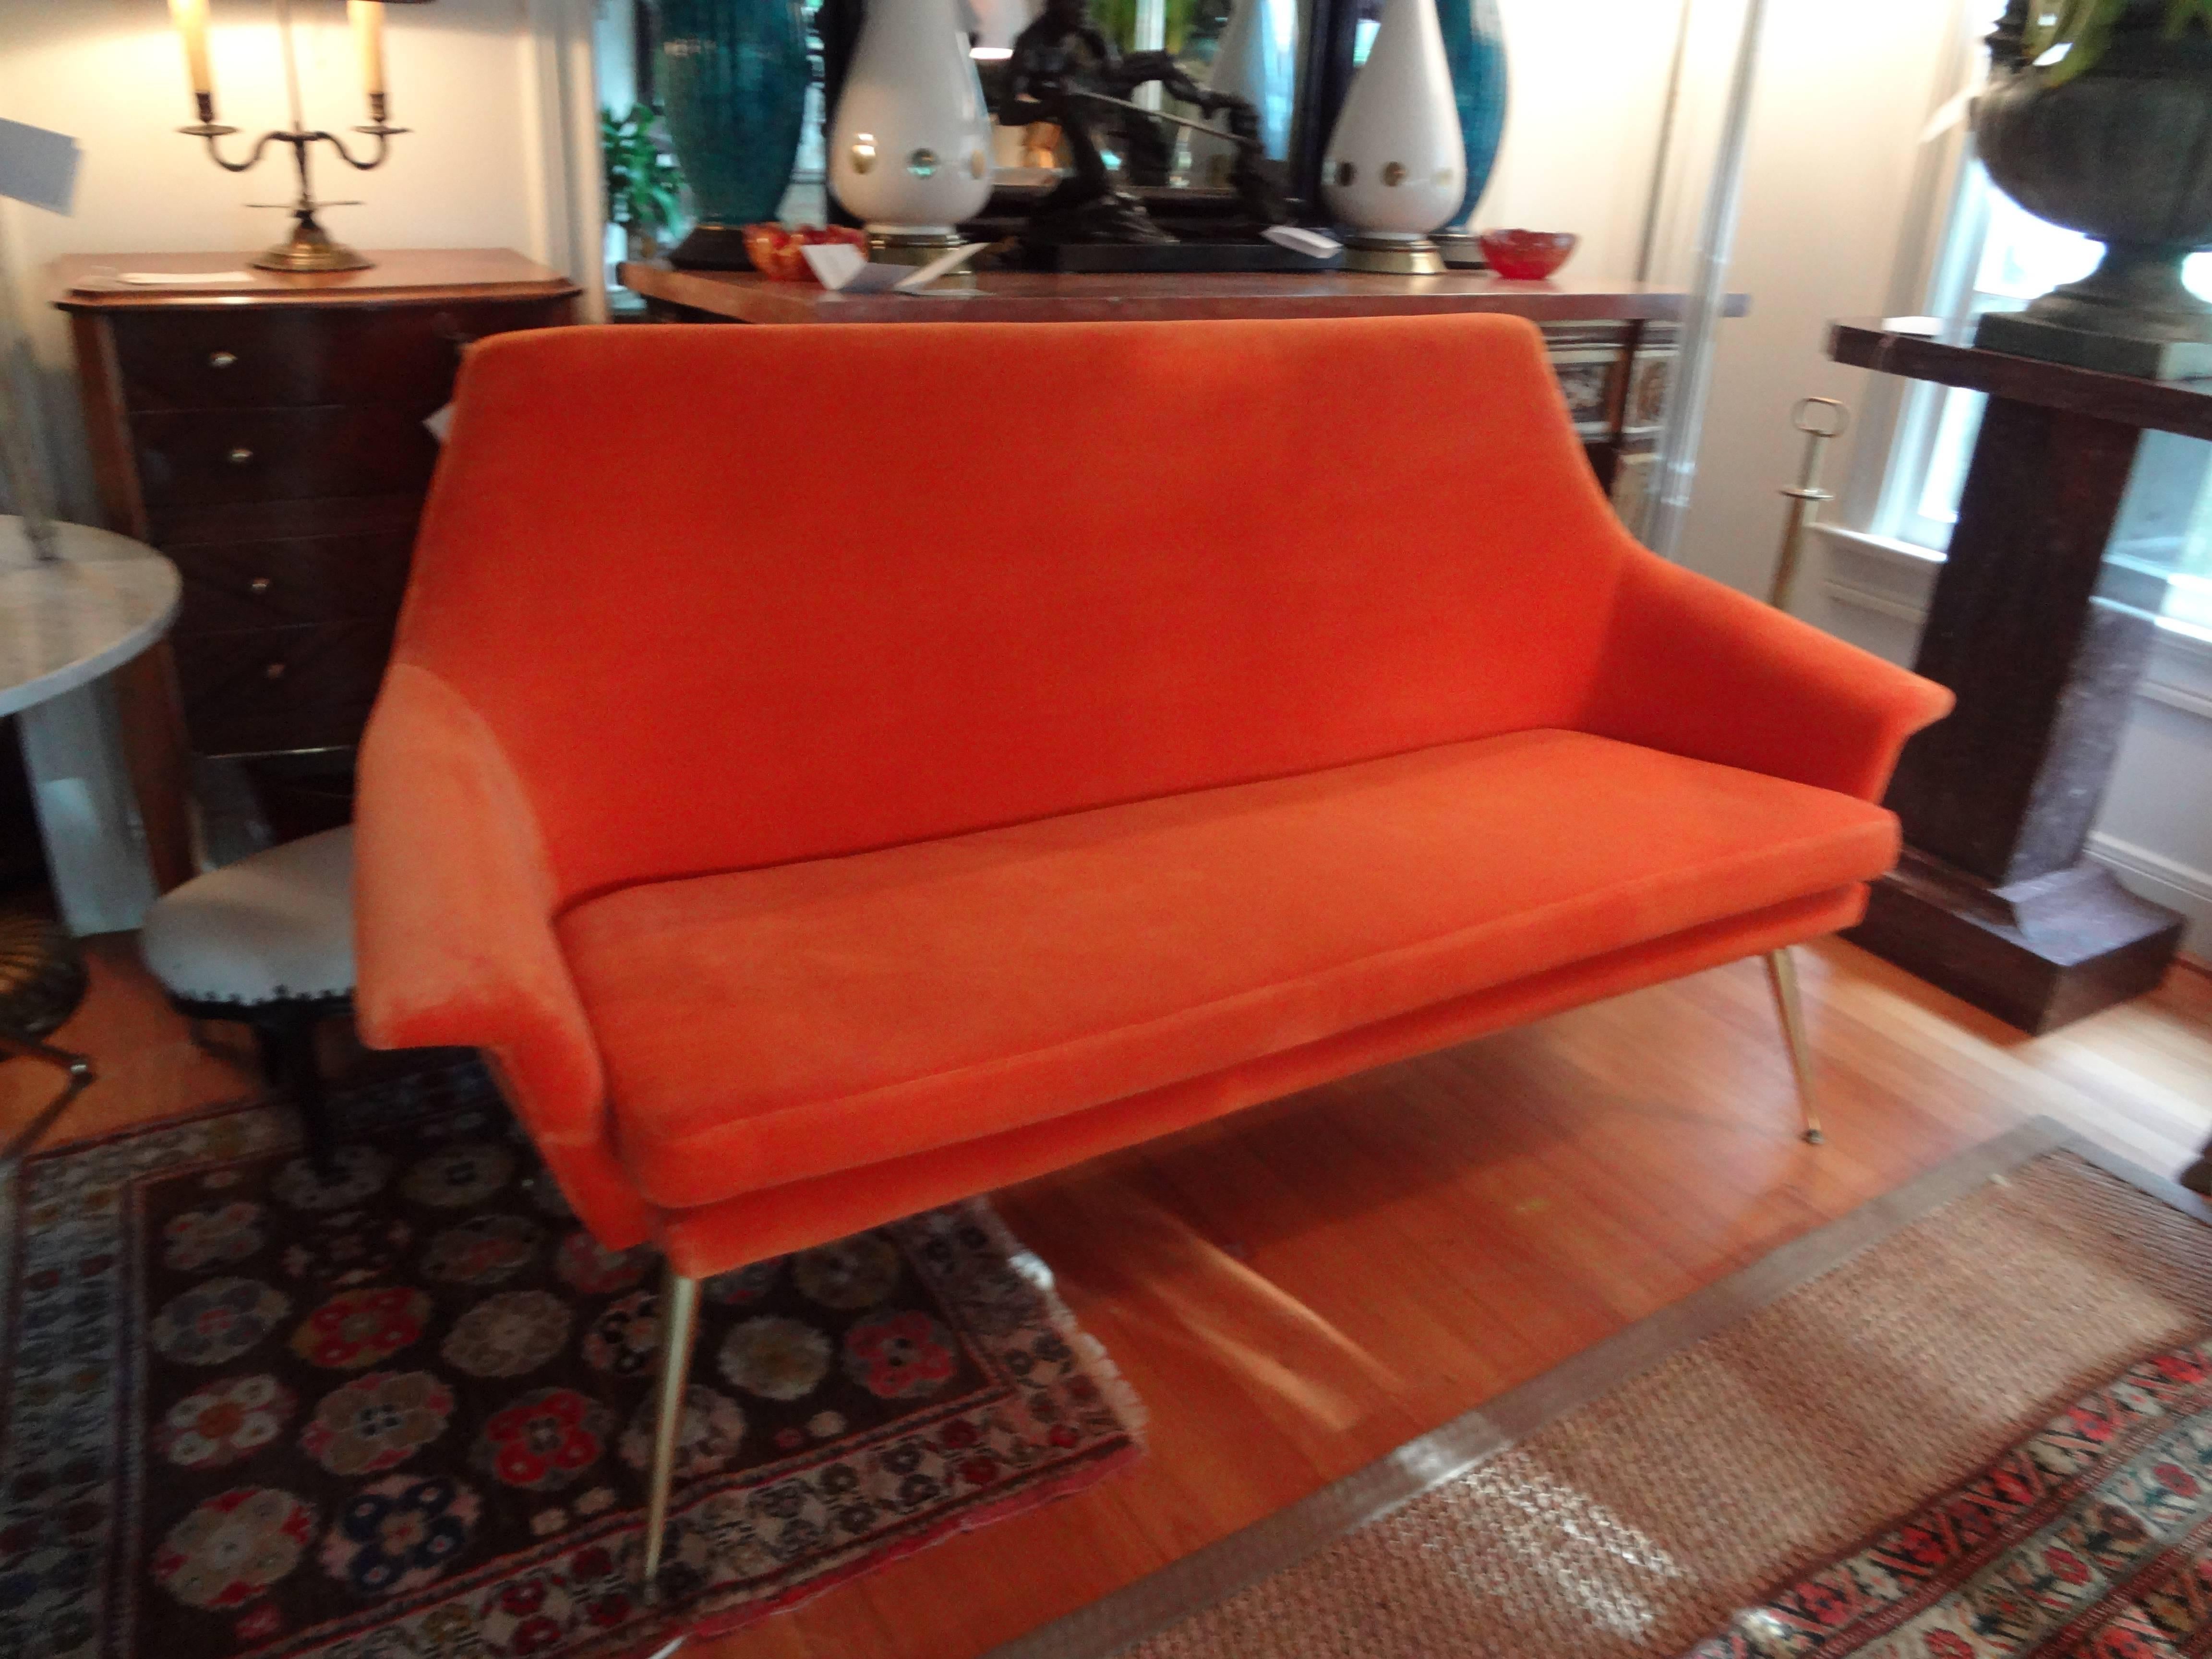 Stylish and comfortable Italian Mid-Century Modern Gio Ponti inspired sofa or canape with brass splayed legs upholstered in orange velvet.
The form is similar to works by artists of the same era in Italy, such as Carlo Mollino , Campo Graffi, Ico